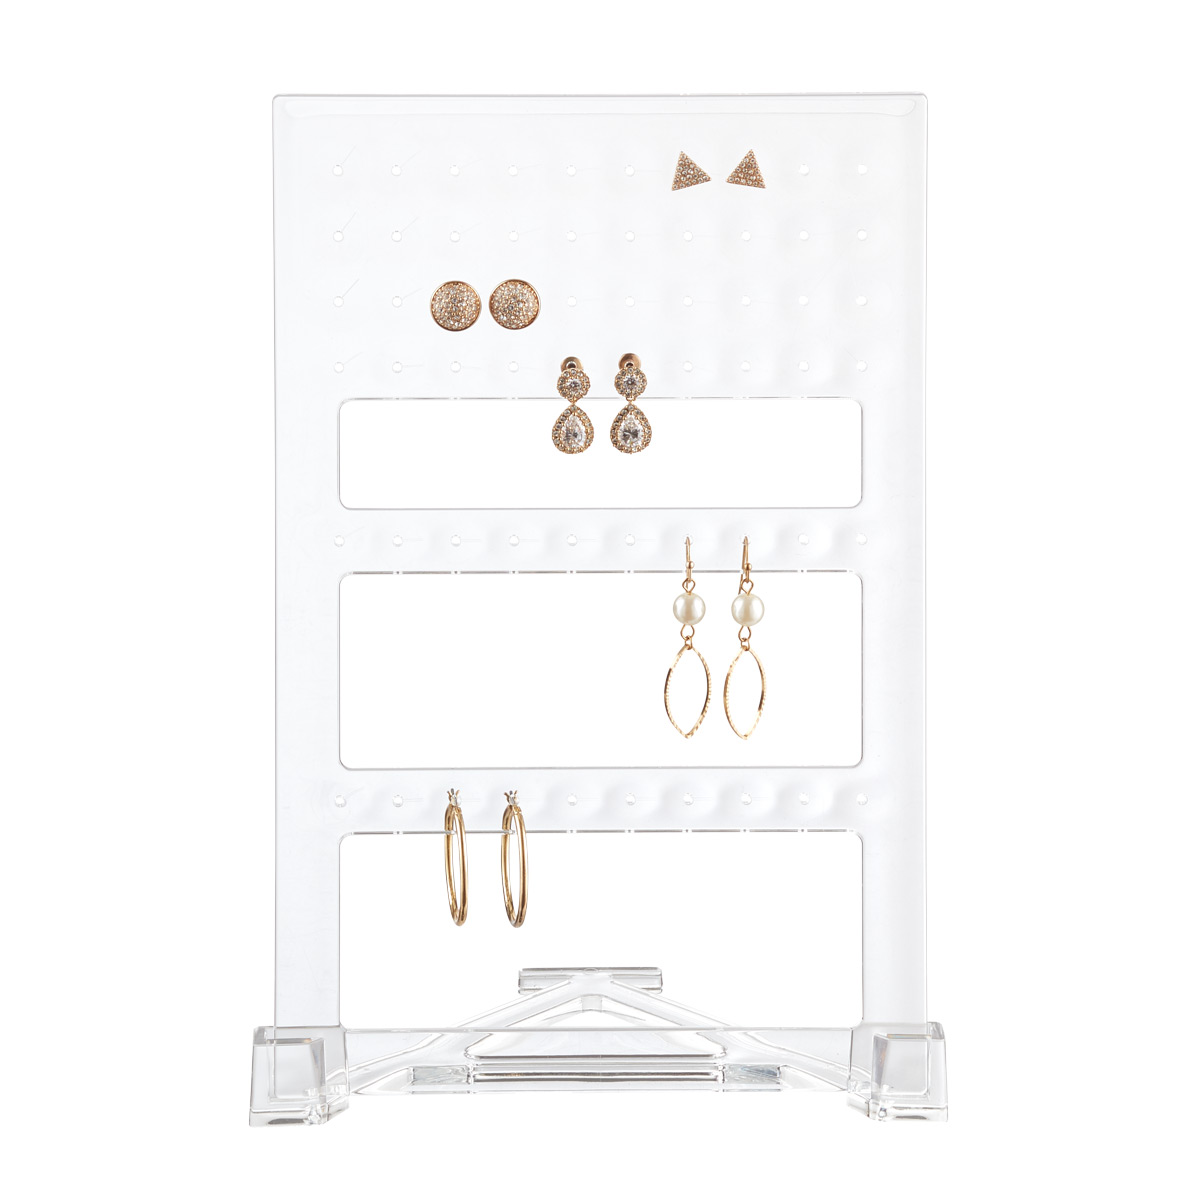 OOKWE Acrylic Earring Display Stand Earring Holder for Girls Pierced  Earring Stud Earring Holder Organizer for Hanging Earring 